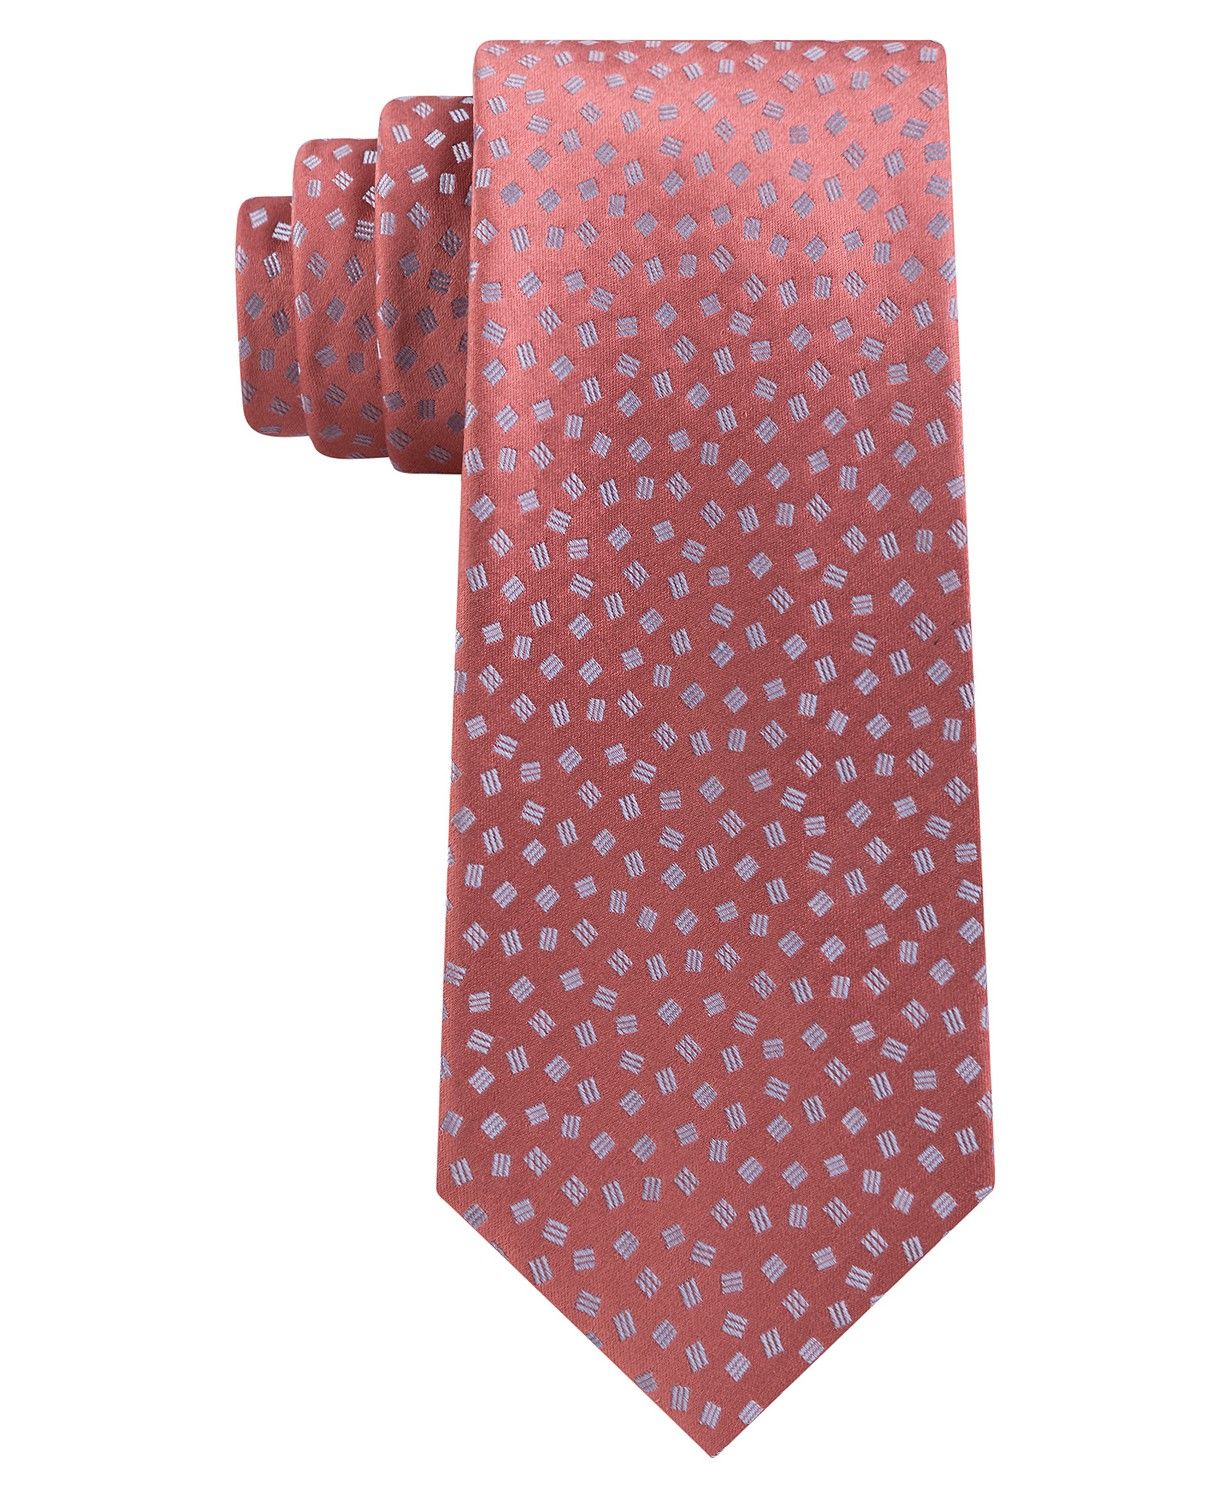 <br>Color: Oranges<br>Pattern: Geometric<br>Style: Neck Tie<br>Width: Classic (3 1/2 in.-3 3/4 in.)<br>Material: Silk